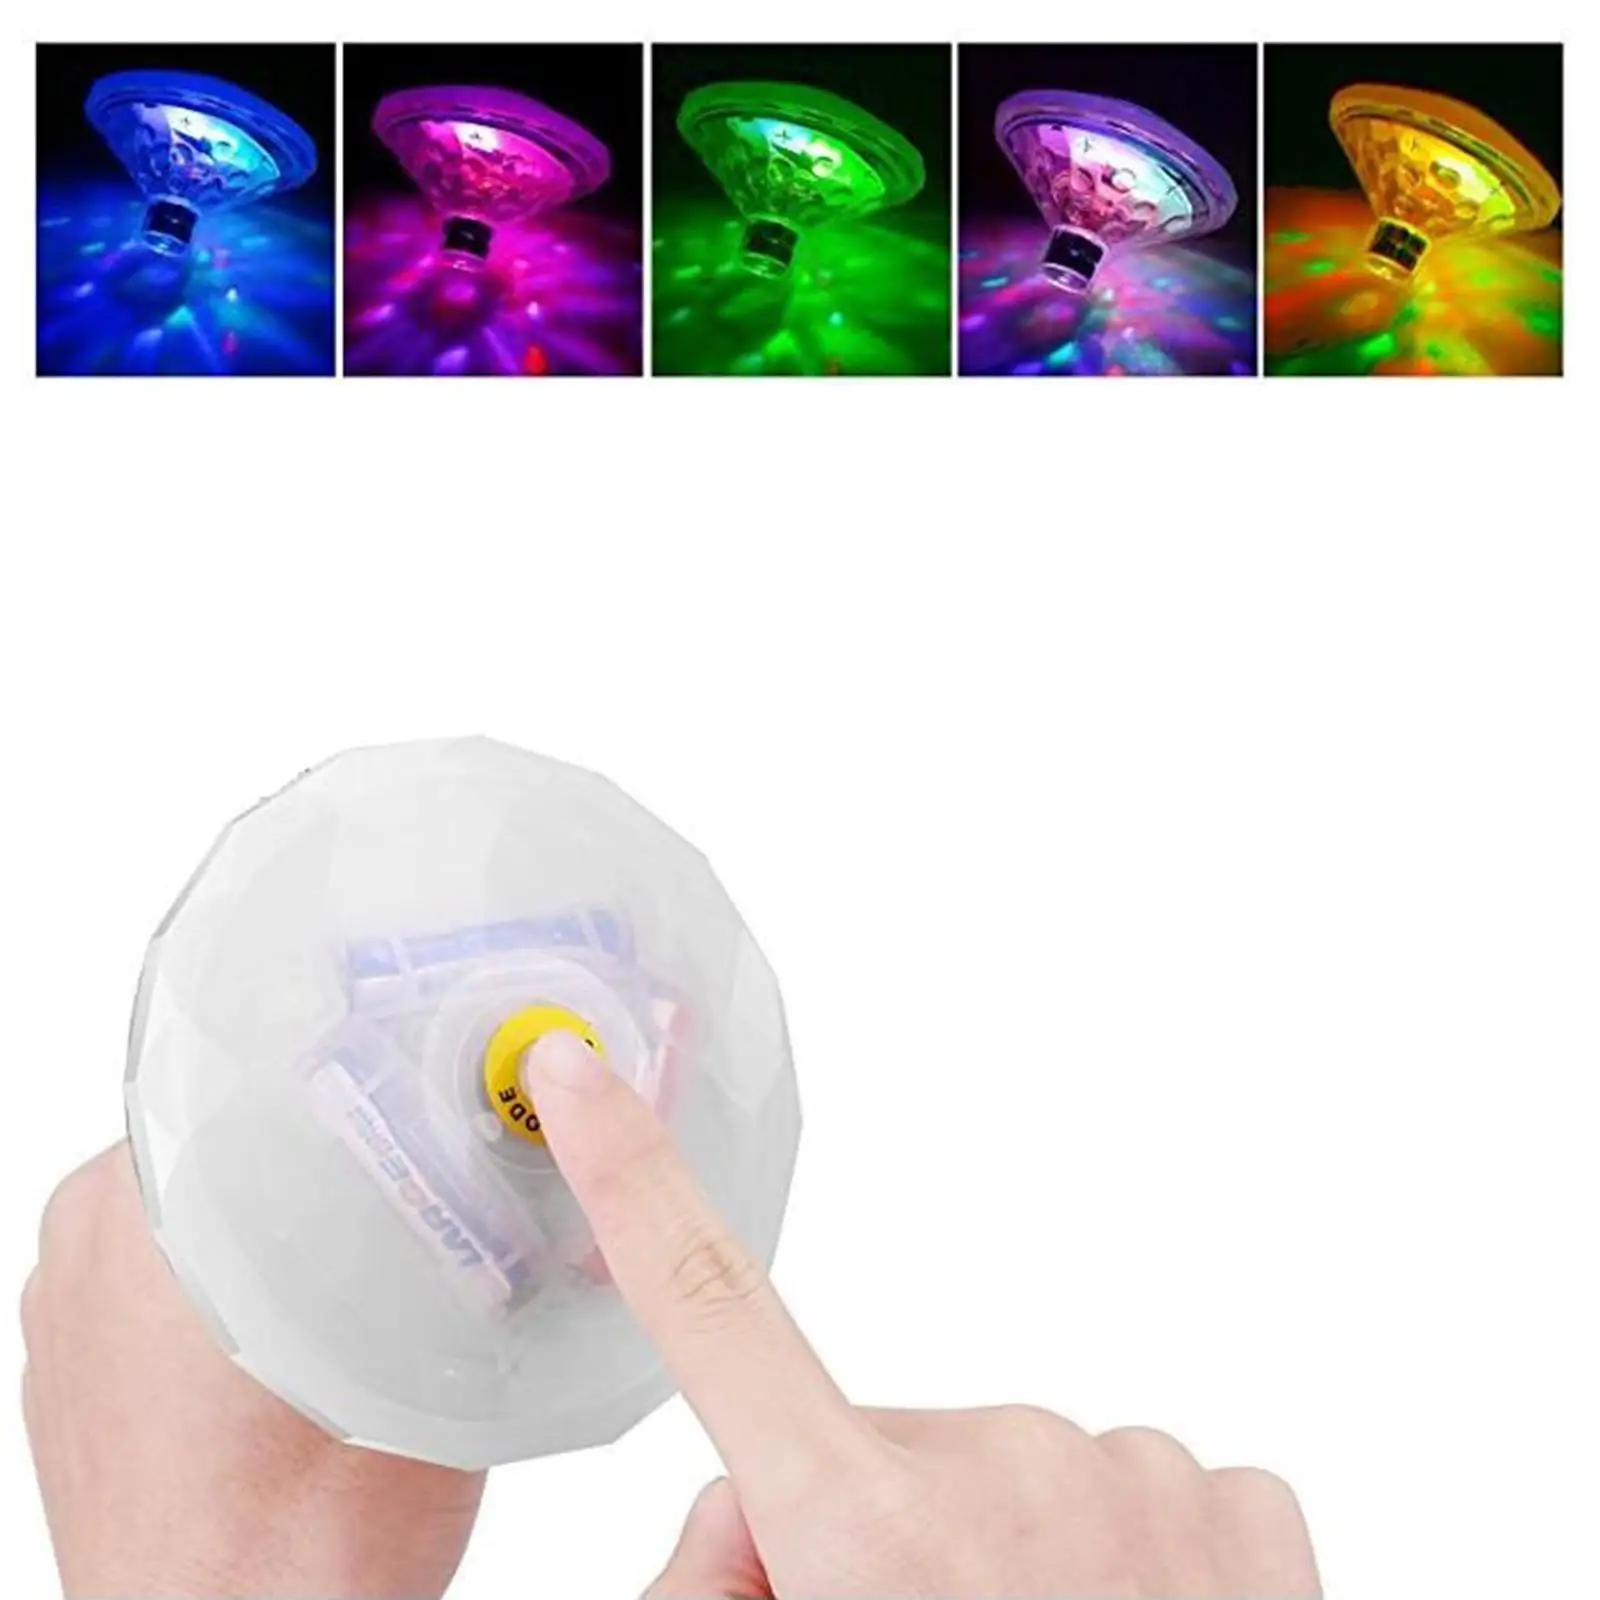 LED Floating  for Bathtub Fountain Hot Tub, Waterproof Color Changing Pond  Lights  Party Wedding Aquarium Lamp